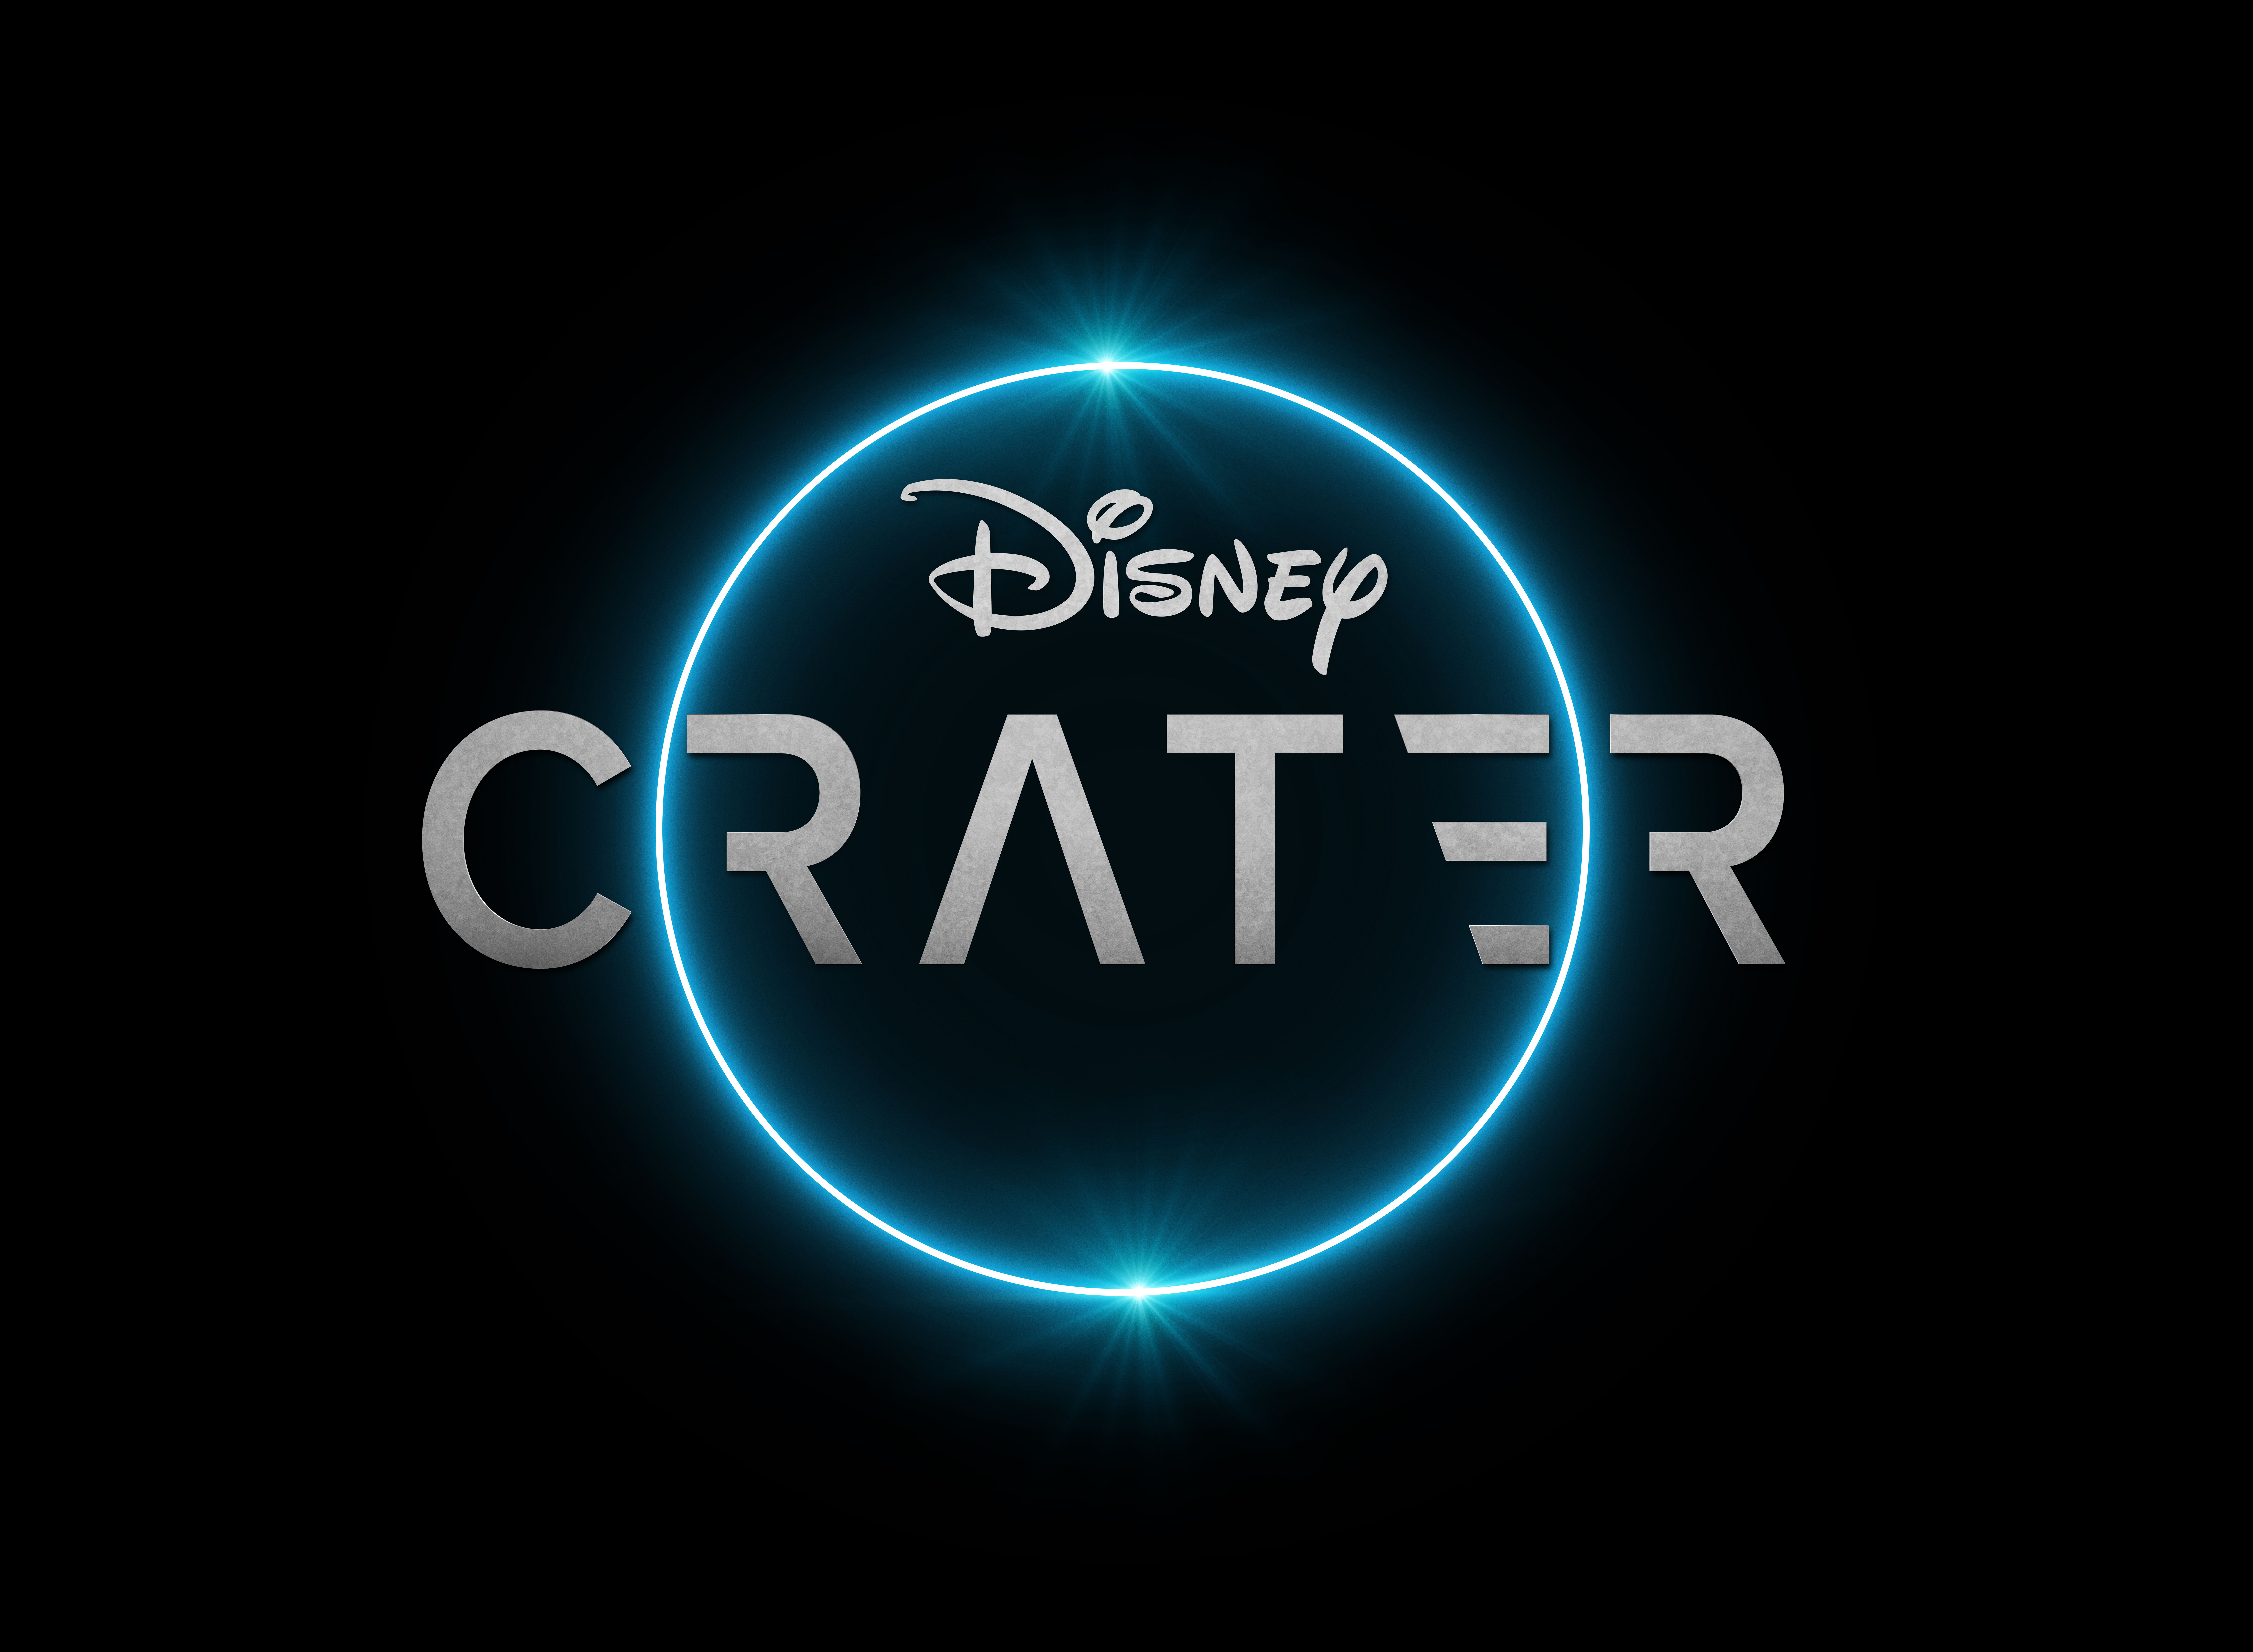 Crater Review: A Struggle Between Child Like Joy And Dark Themes